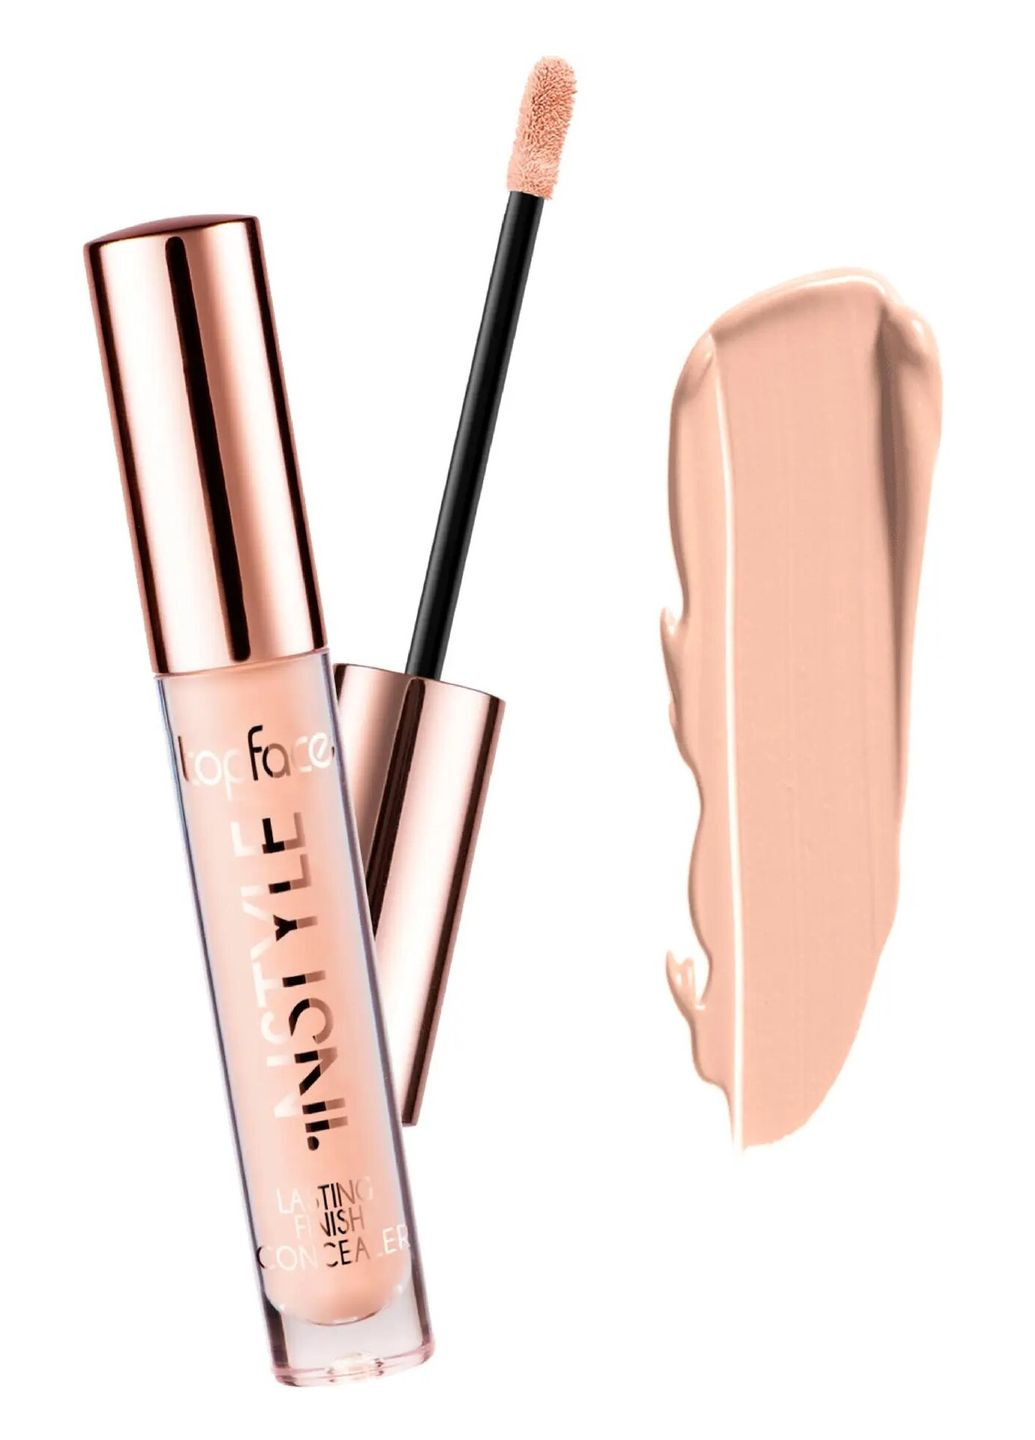 Консиллер для лица Instyle Lasting Finish Concealer №1, 3.5 мл TopFace (270368318)